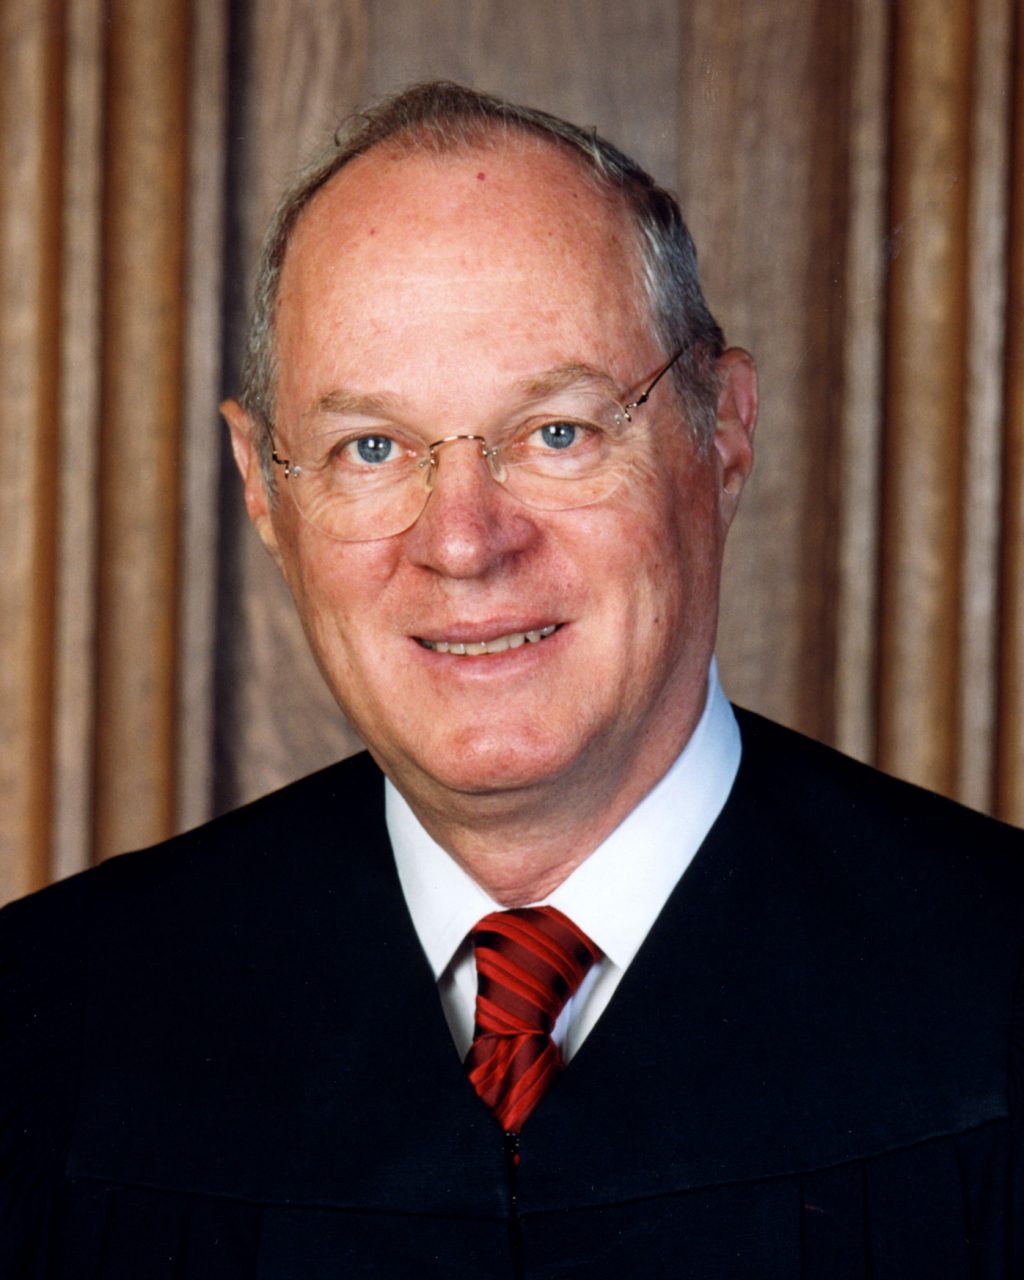 Anthony_Kennedy_official_SCOTUS_portrait_crop